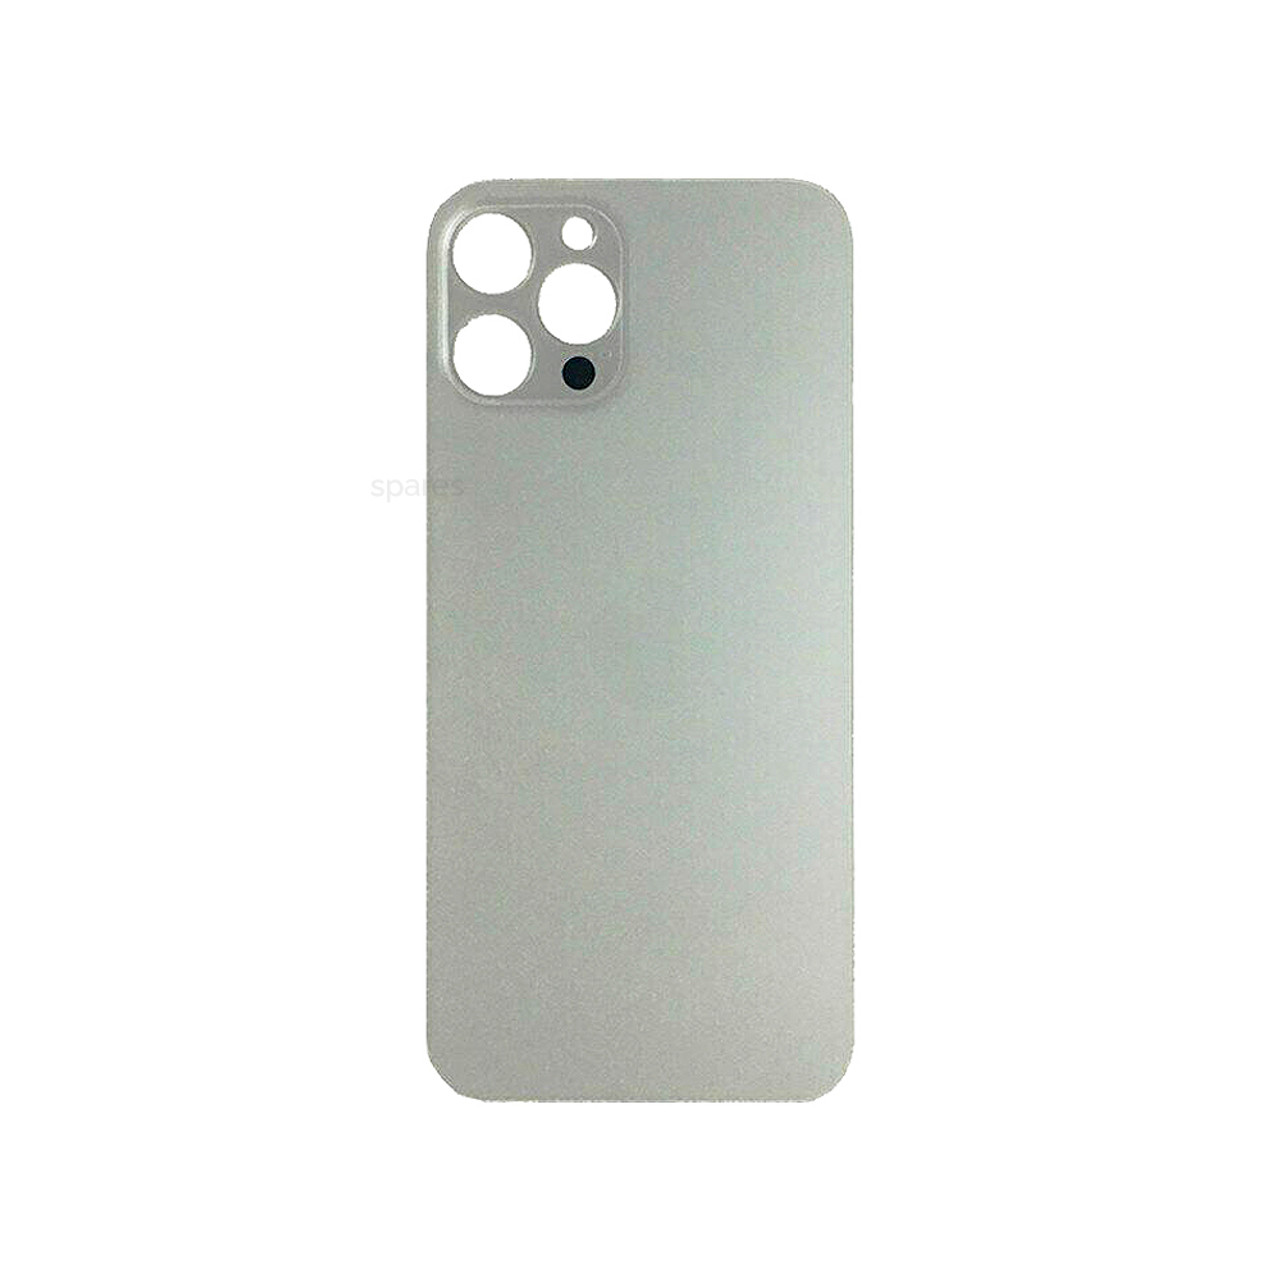 iPhone 12 Pro Max Rear Back Glass With Big Camera Hole Silver Replacement